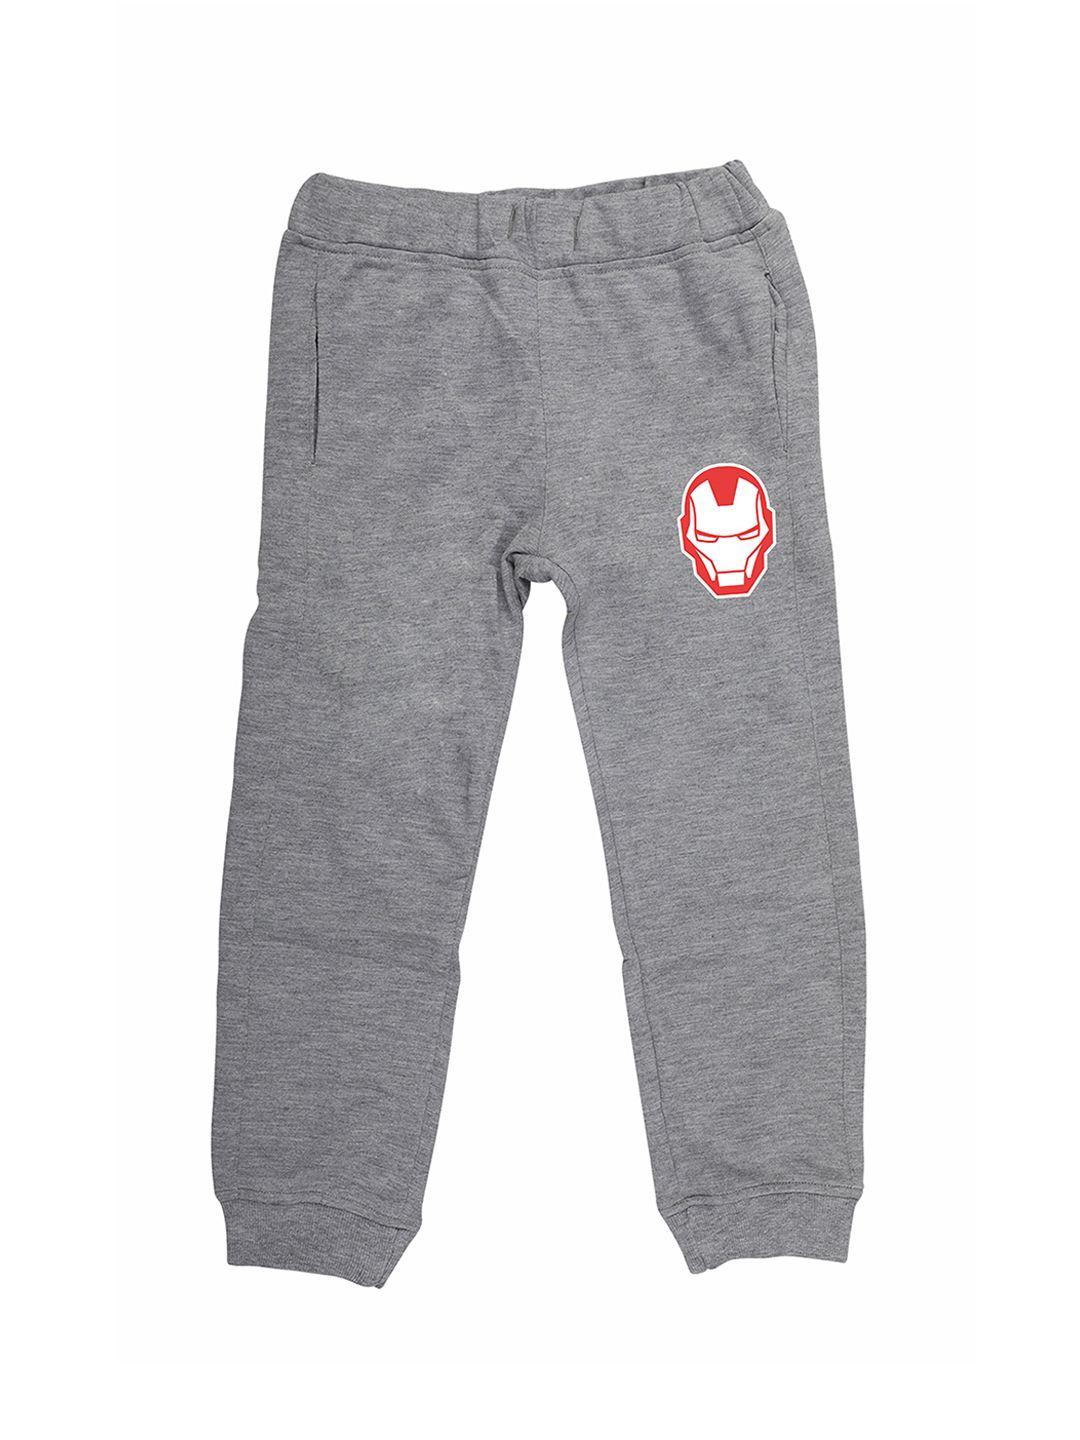 marvel by wear your mind kids grey joggers